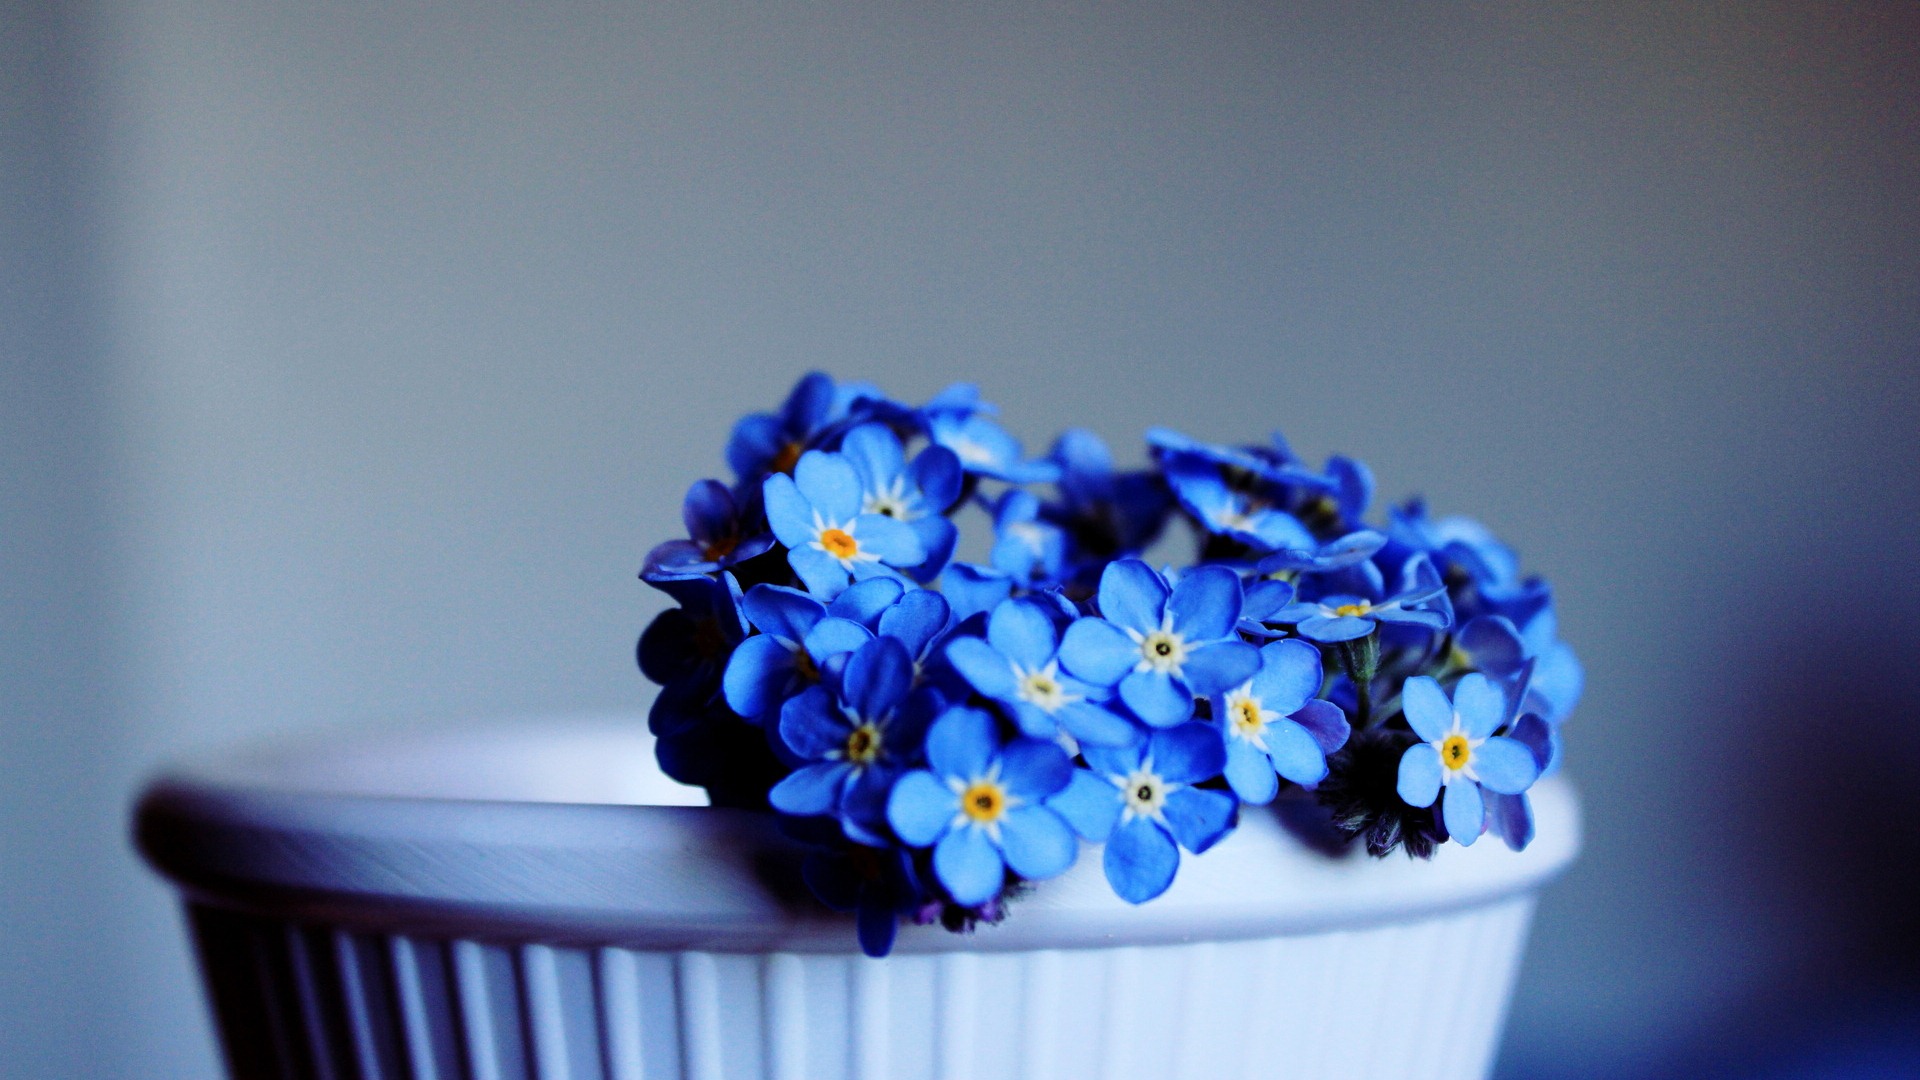 Small and beautiful forget-me-flowers HD wallpaper #6 - 1920x1080